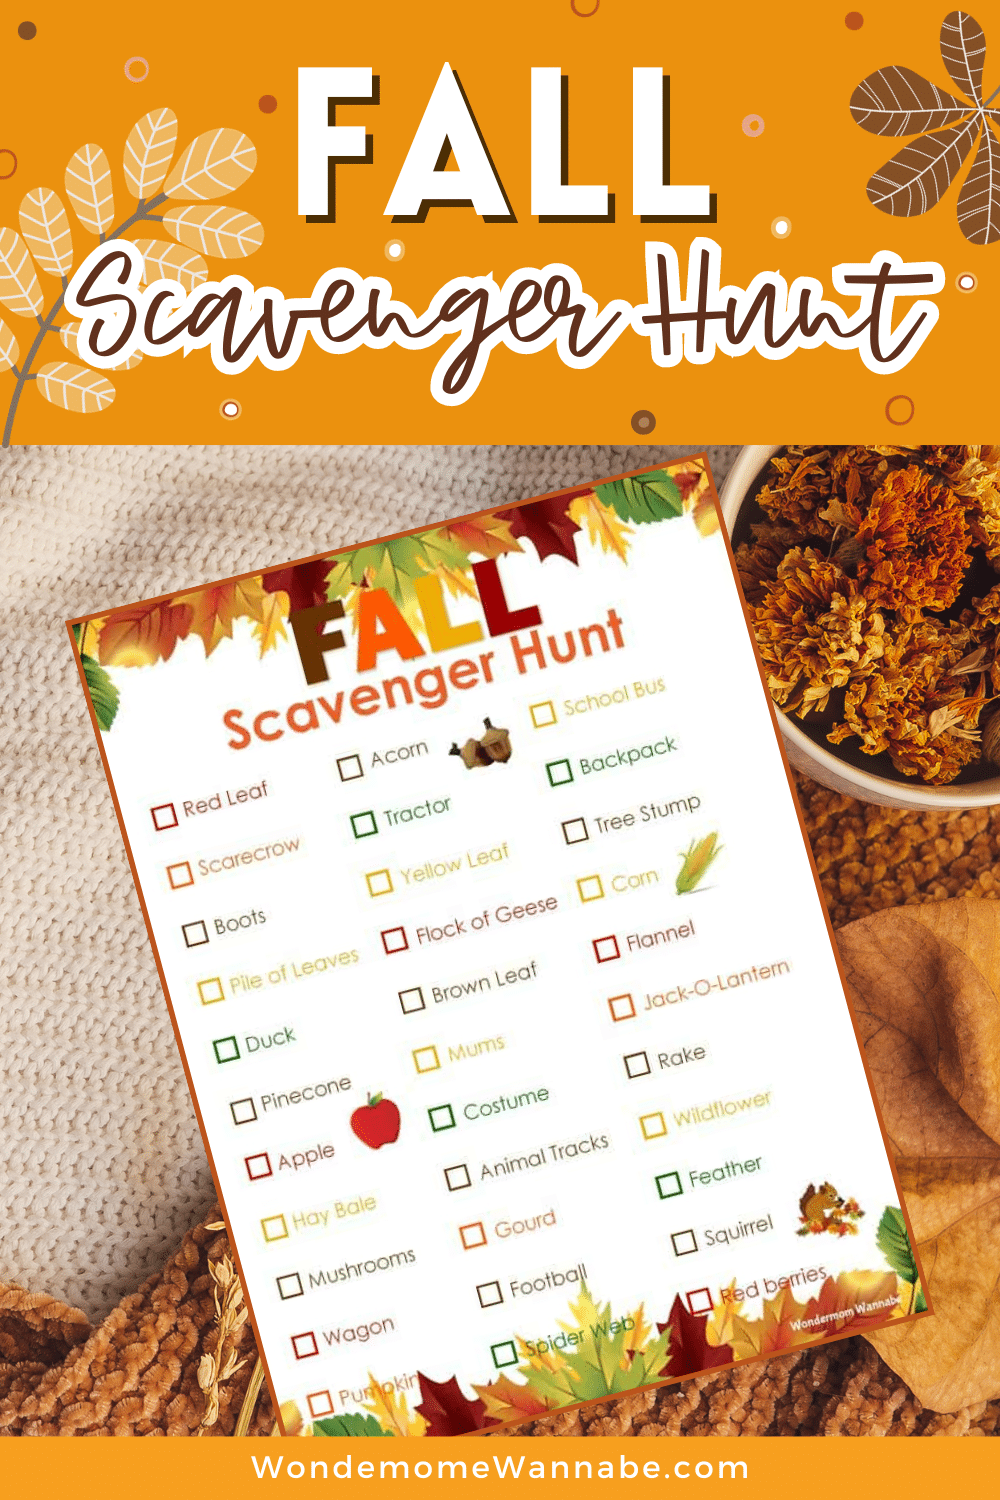 Fall scavenger hunt: Need some autumn-themed fun? Look no further than our printable fall scavenger hunt! This interactive activity will keep your family entertained as they search for items that perfectly capture the essence